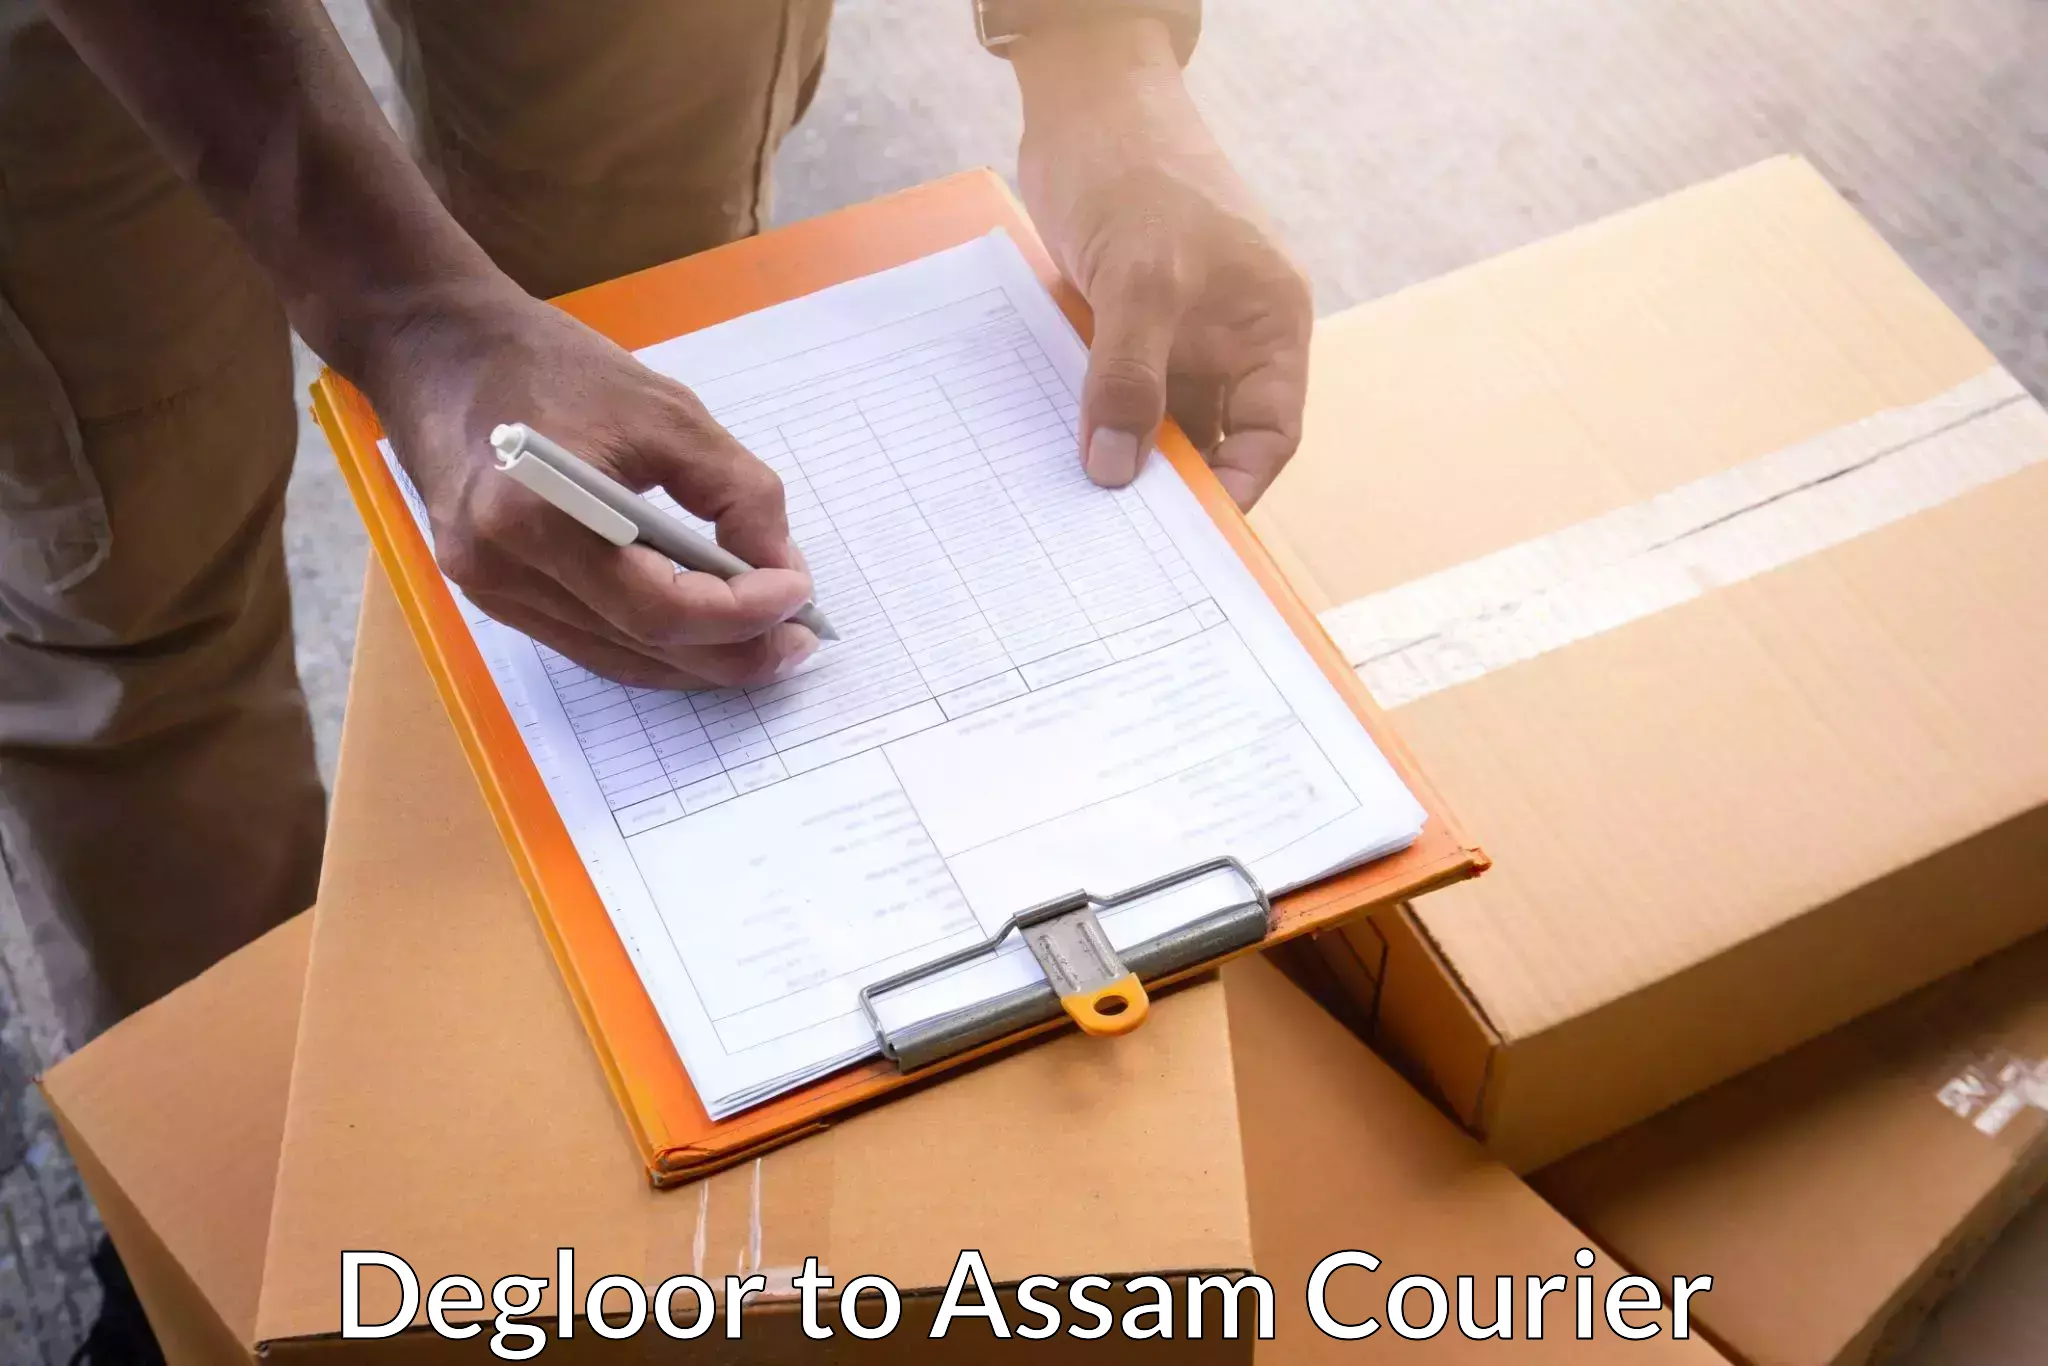 Parcel service for businesses Degloor to Lala Assam